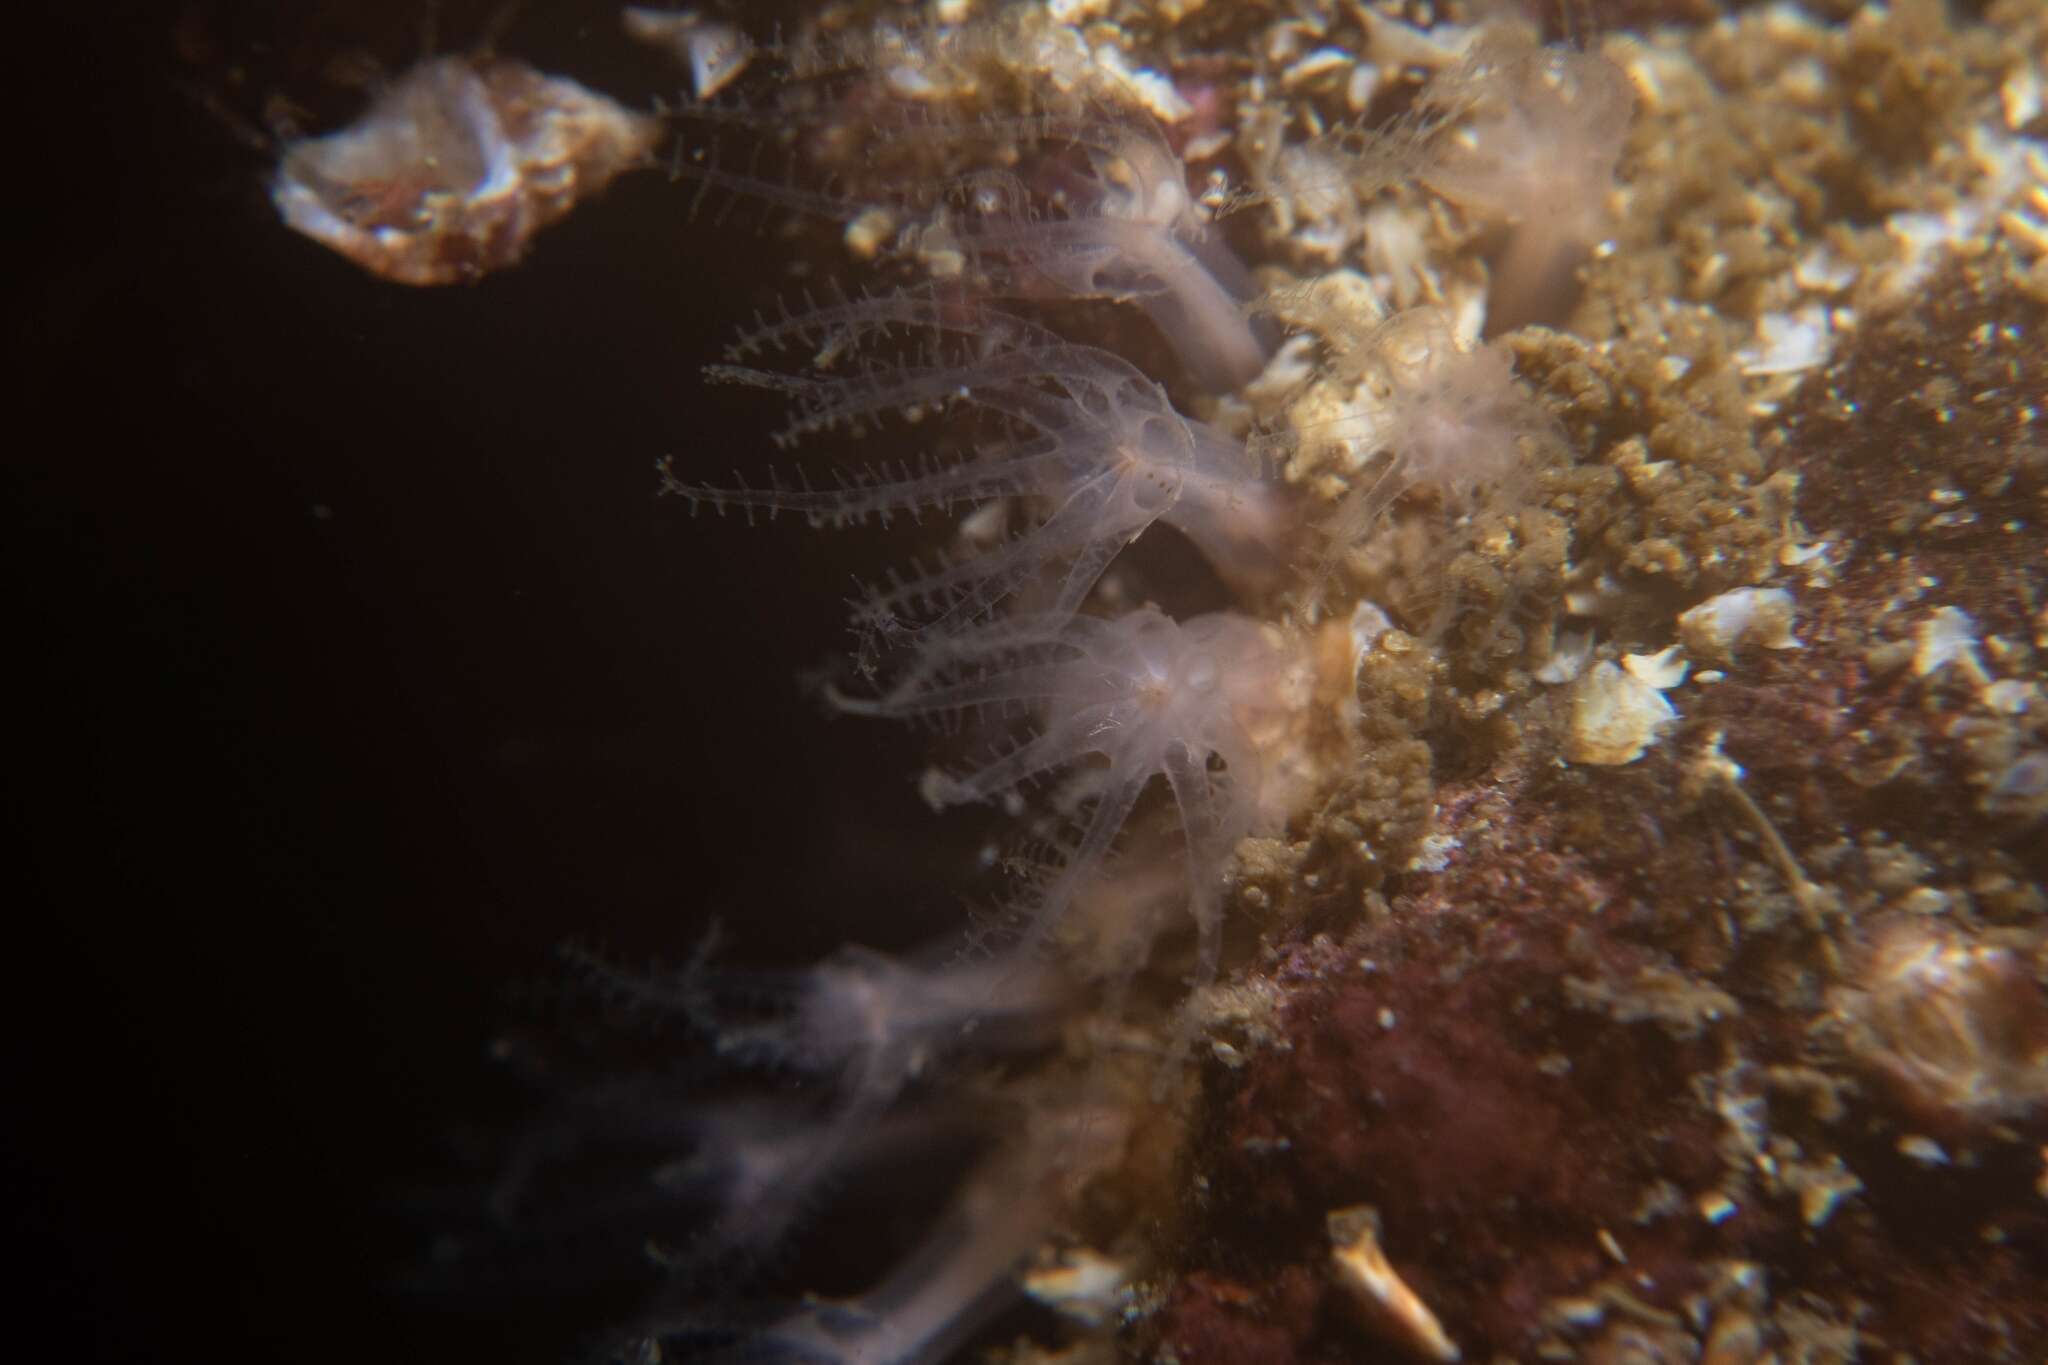 Image of rough-skinned soft coral